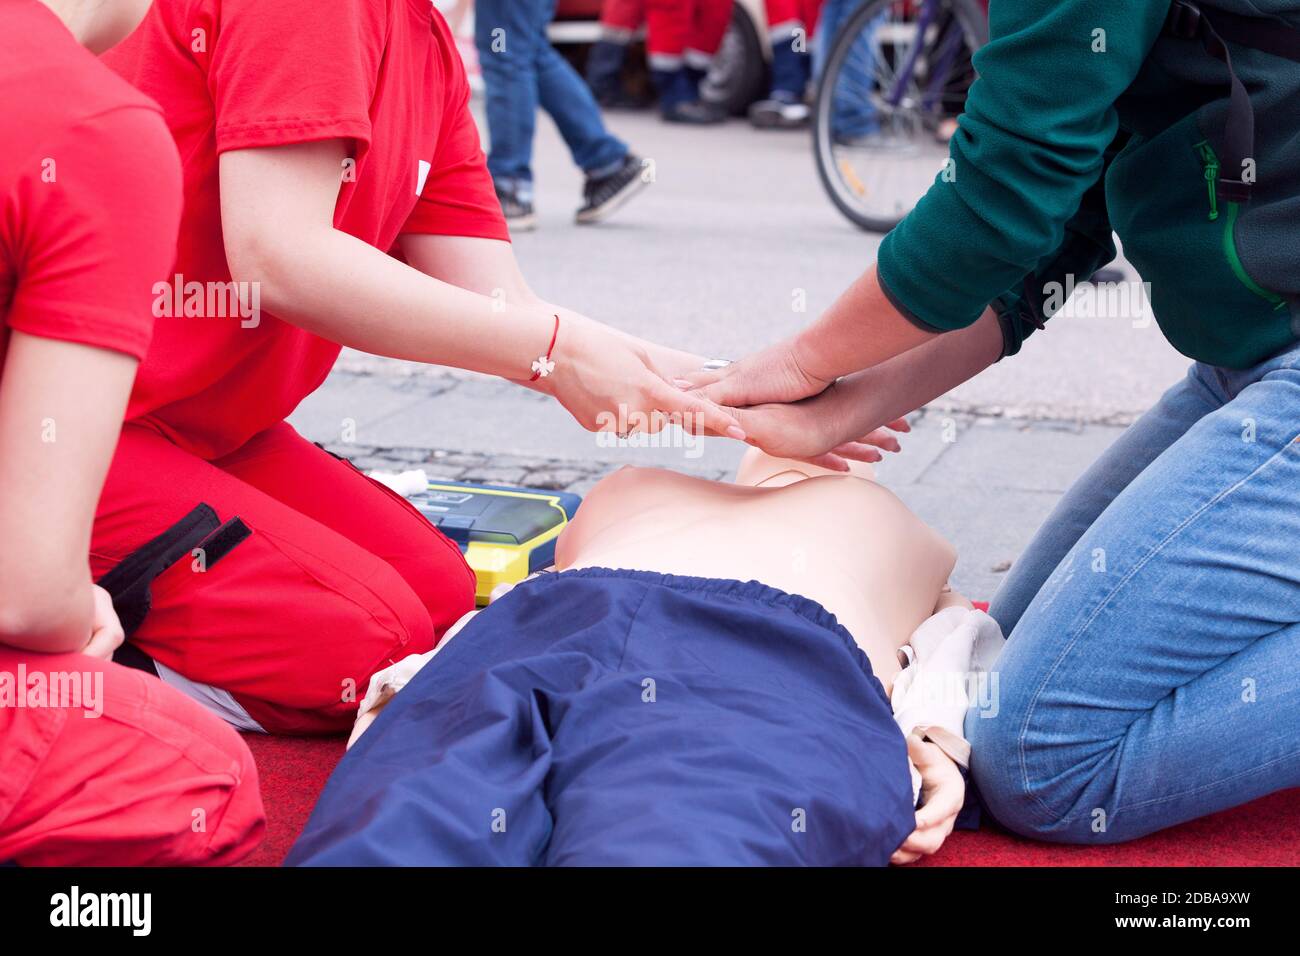 First aid and CPR training Stock Photo